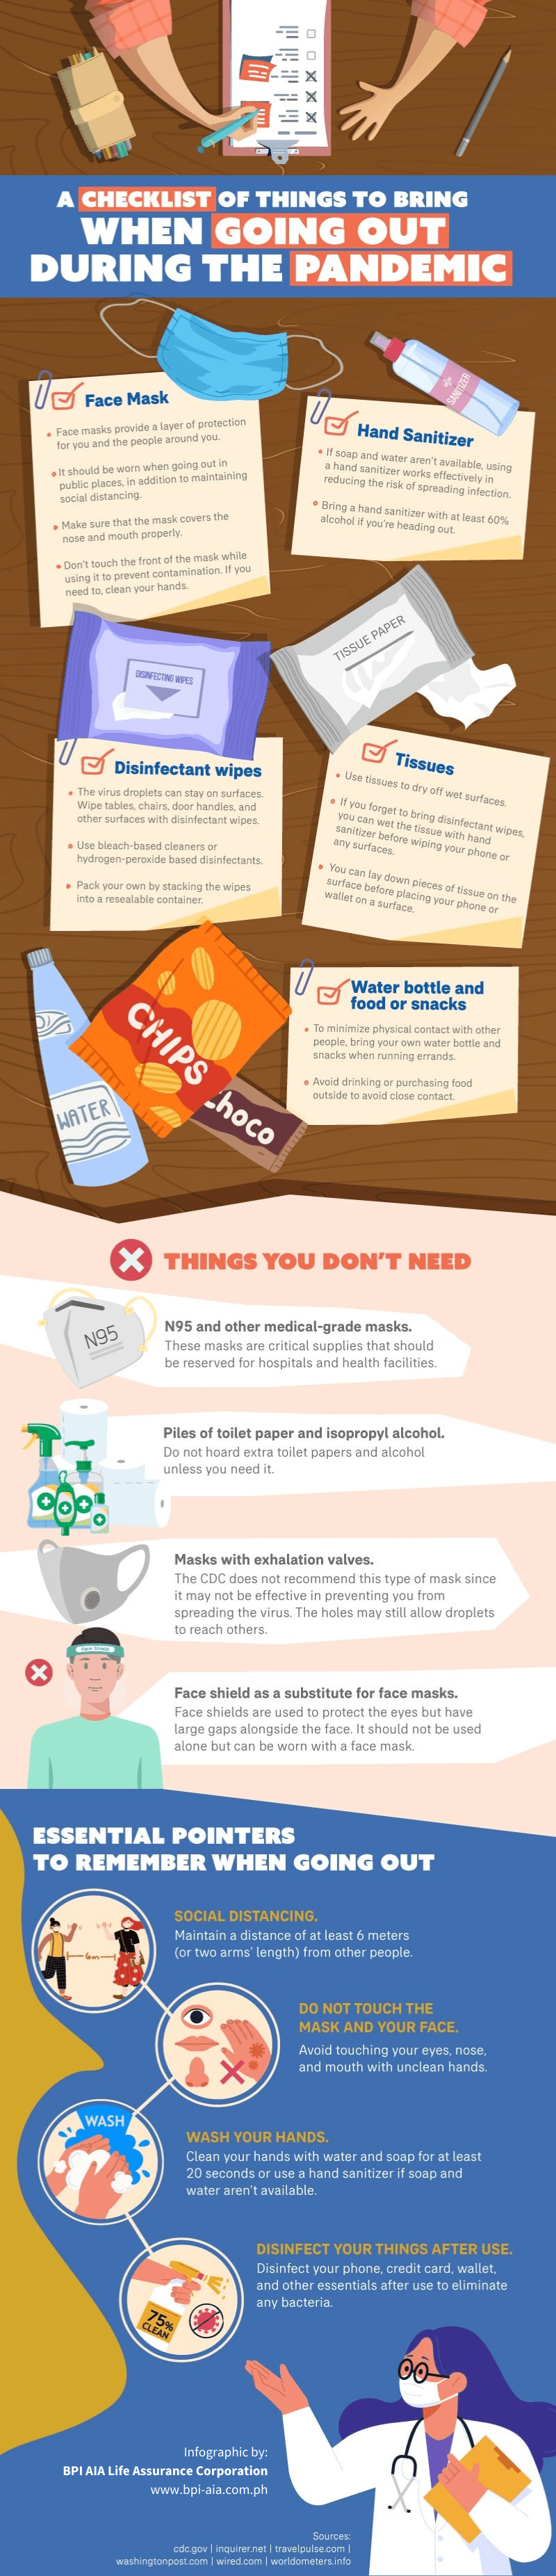 A Checklist of Things to Bring When Going Out During the Pandemic - Infographic